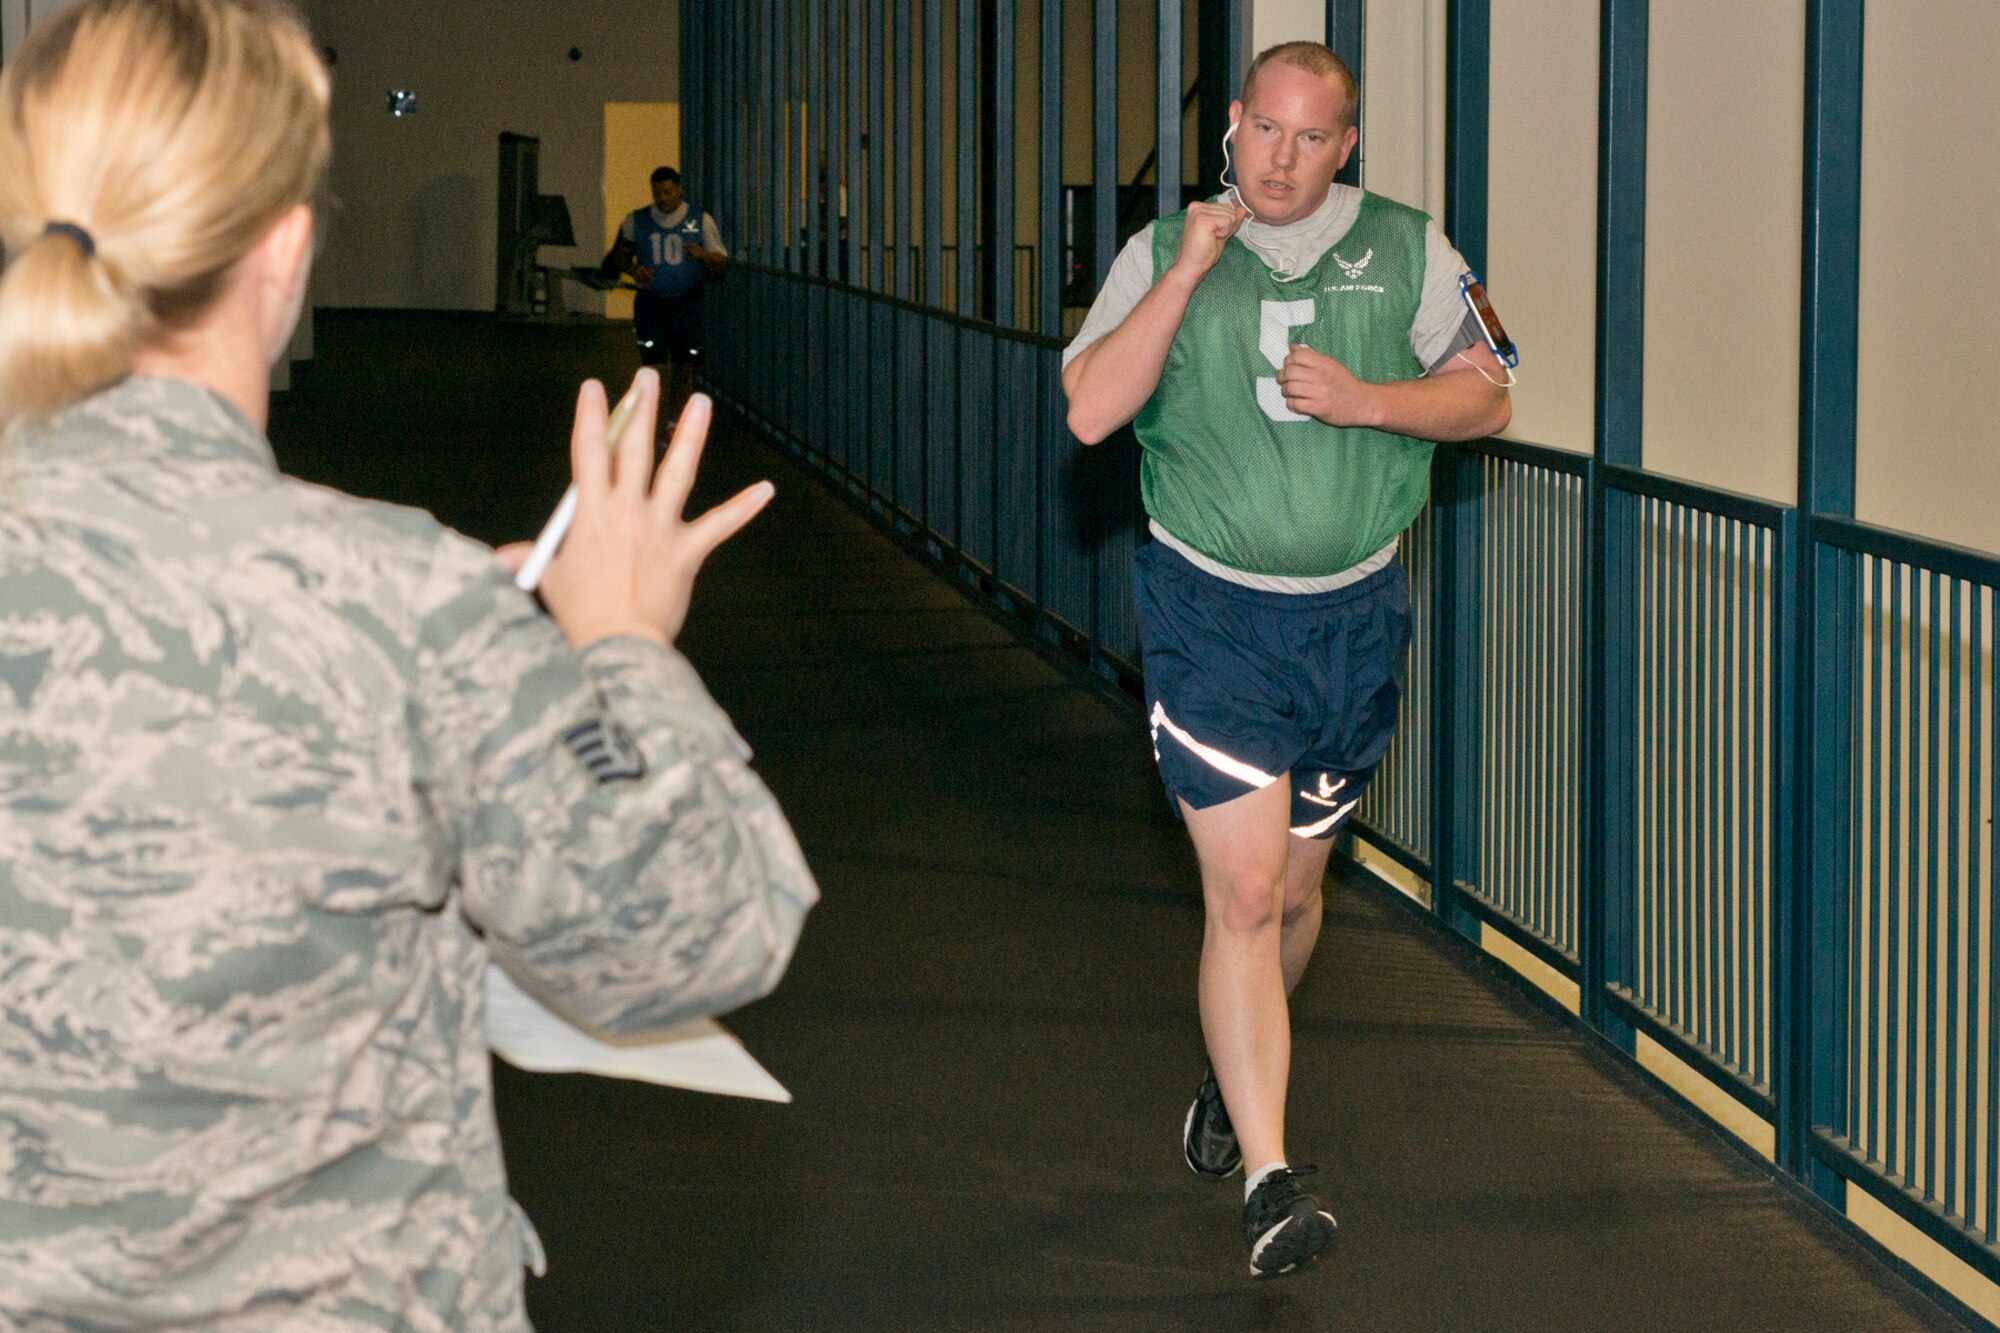 U.S. Air Force Reserve Tech. Sgt. Jason Gibson, an aerial porter assigned to the 96th Aerial Port Squadron, acknowledges five laps completed from Staff Sgt. Amber Rust, during the run portion of his physical fitness assessment test at Little Rock Air Force Base, Ark., Jan. 9, 2016. Rust, a crew chief assigned to the 913th Maintenance Squadron, volunteered as a Physical Training Leader and monitors and records scores for fellow Airmen as they completed their tests. (U.S. Air Force photo by Master Sgt. Jeff Walston/Released)